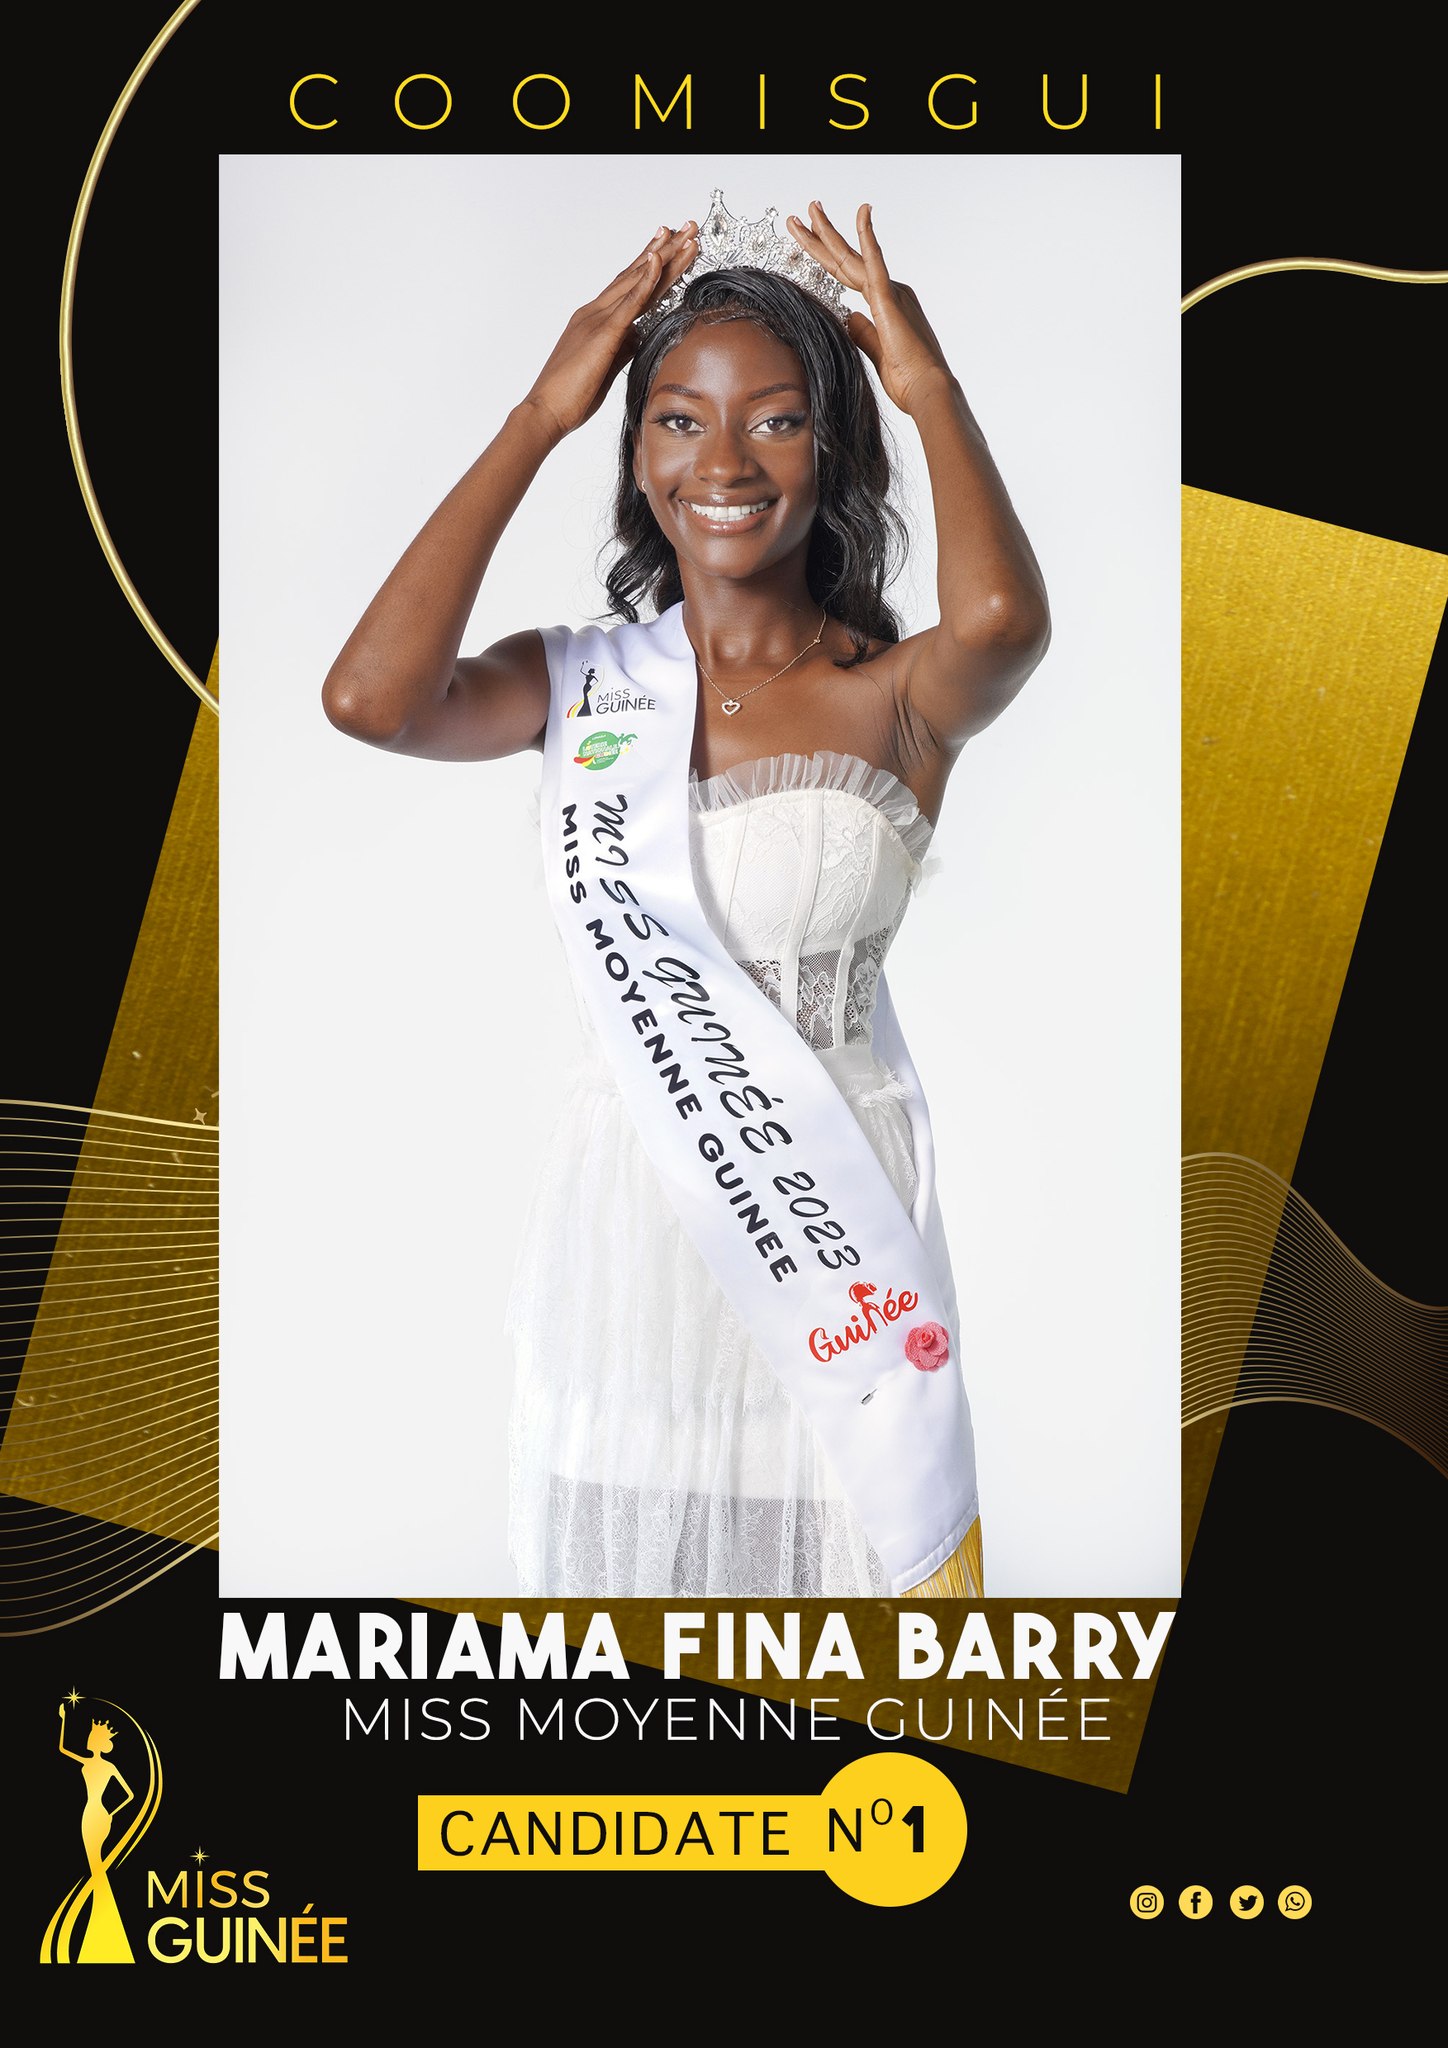 The Comity of COOMISGUI - Mrs AMINATA DIALLO  presents the Finalist of MISS GUINEE 2023 - Miss MARIAMA FINA BARRY  - Representing Miss Moyene GUINEE - CANDIDATE number 1 - DN-AFRICA Media Partner